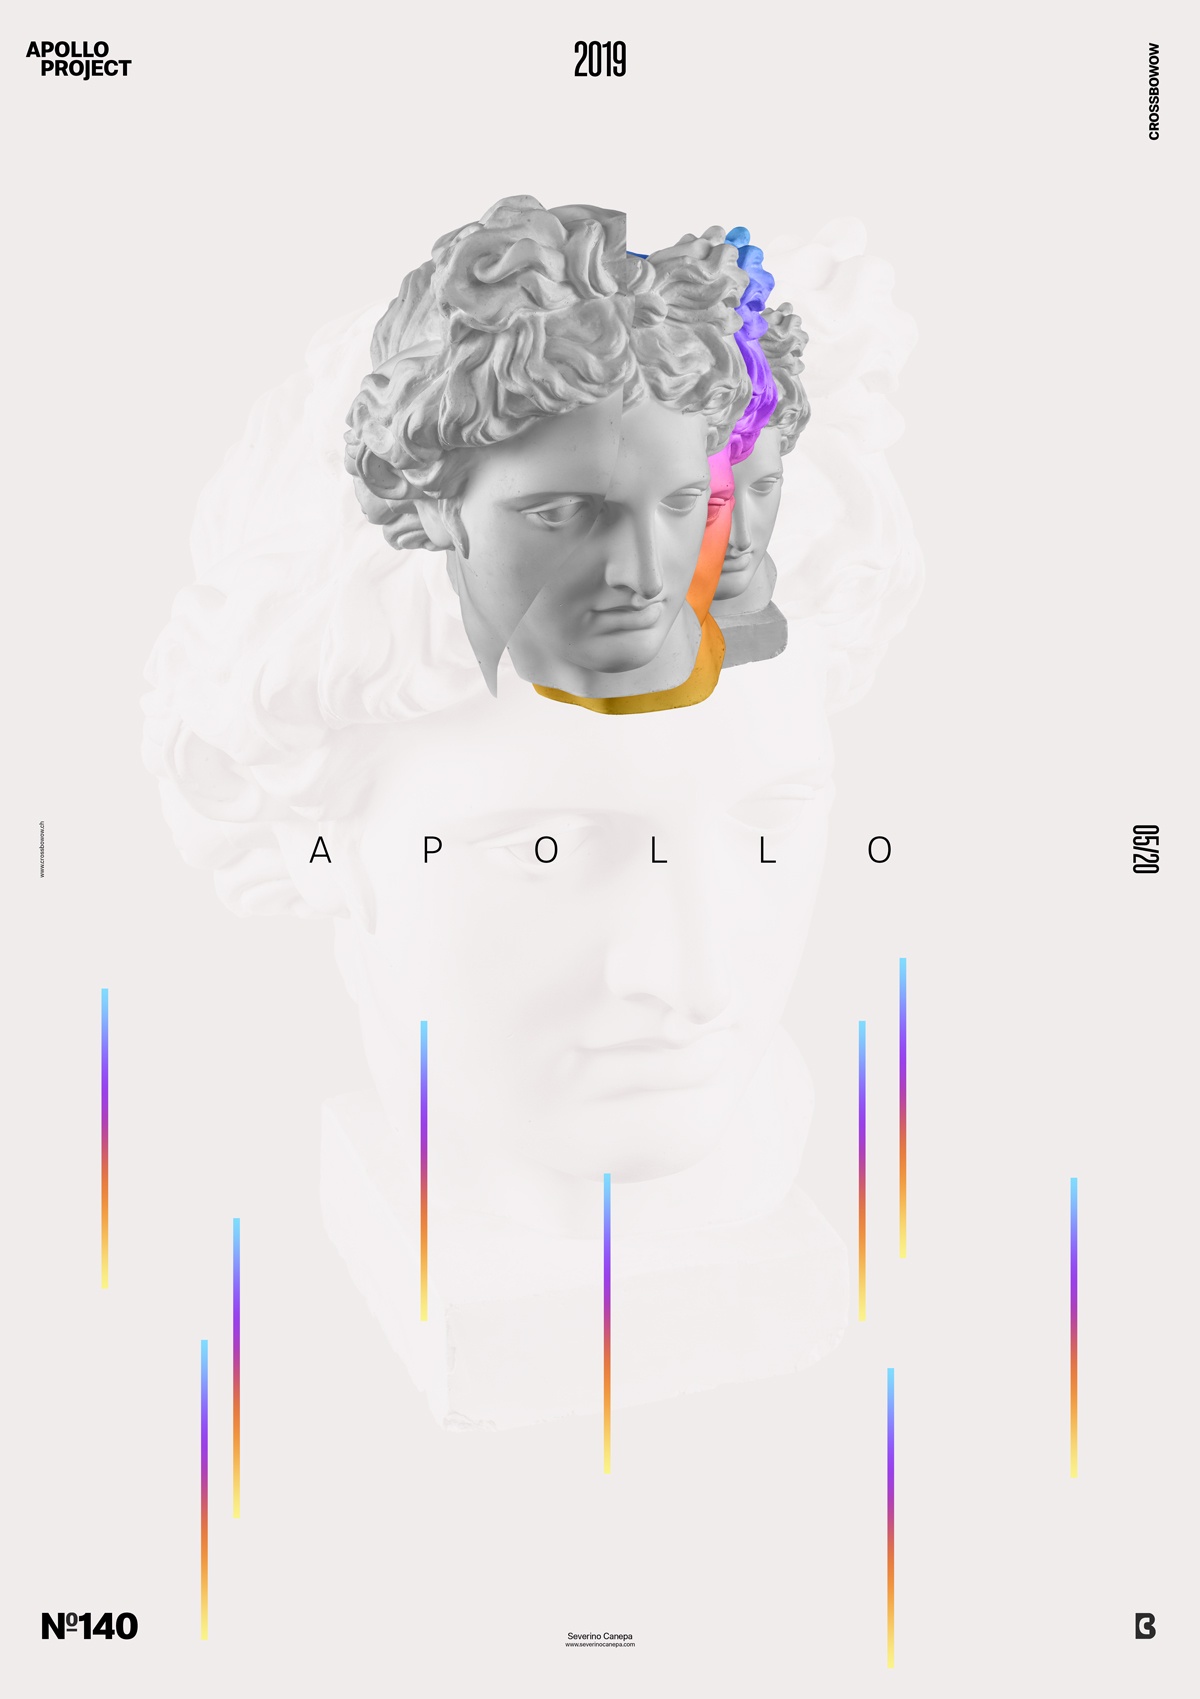 Minimalist and sober graphic made of geometric forms and Apollo's Statue